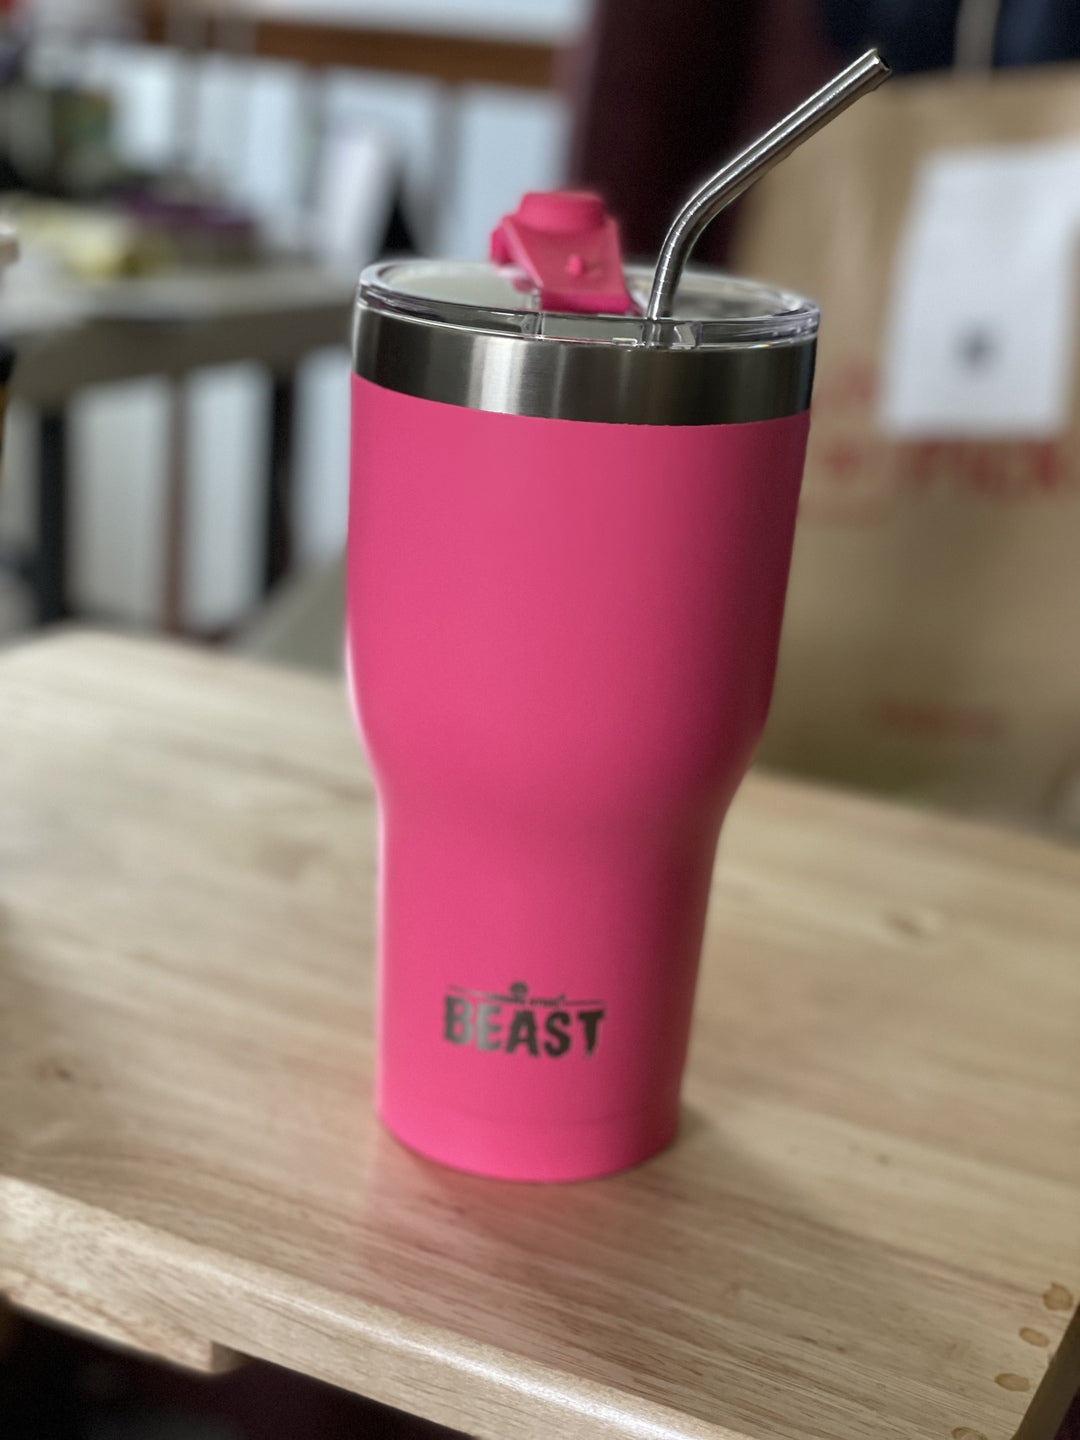 Greens Steel - Our Hot Pink Beast Tumbler 🌟 ' I have used my Greens Steel  BEAST for both hot and cold beverages and it's great at keeping hot drinks  hot, and